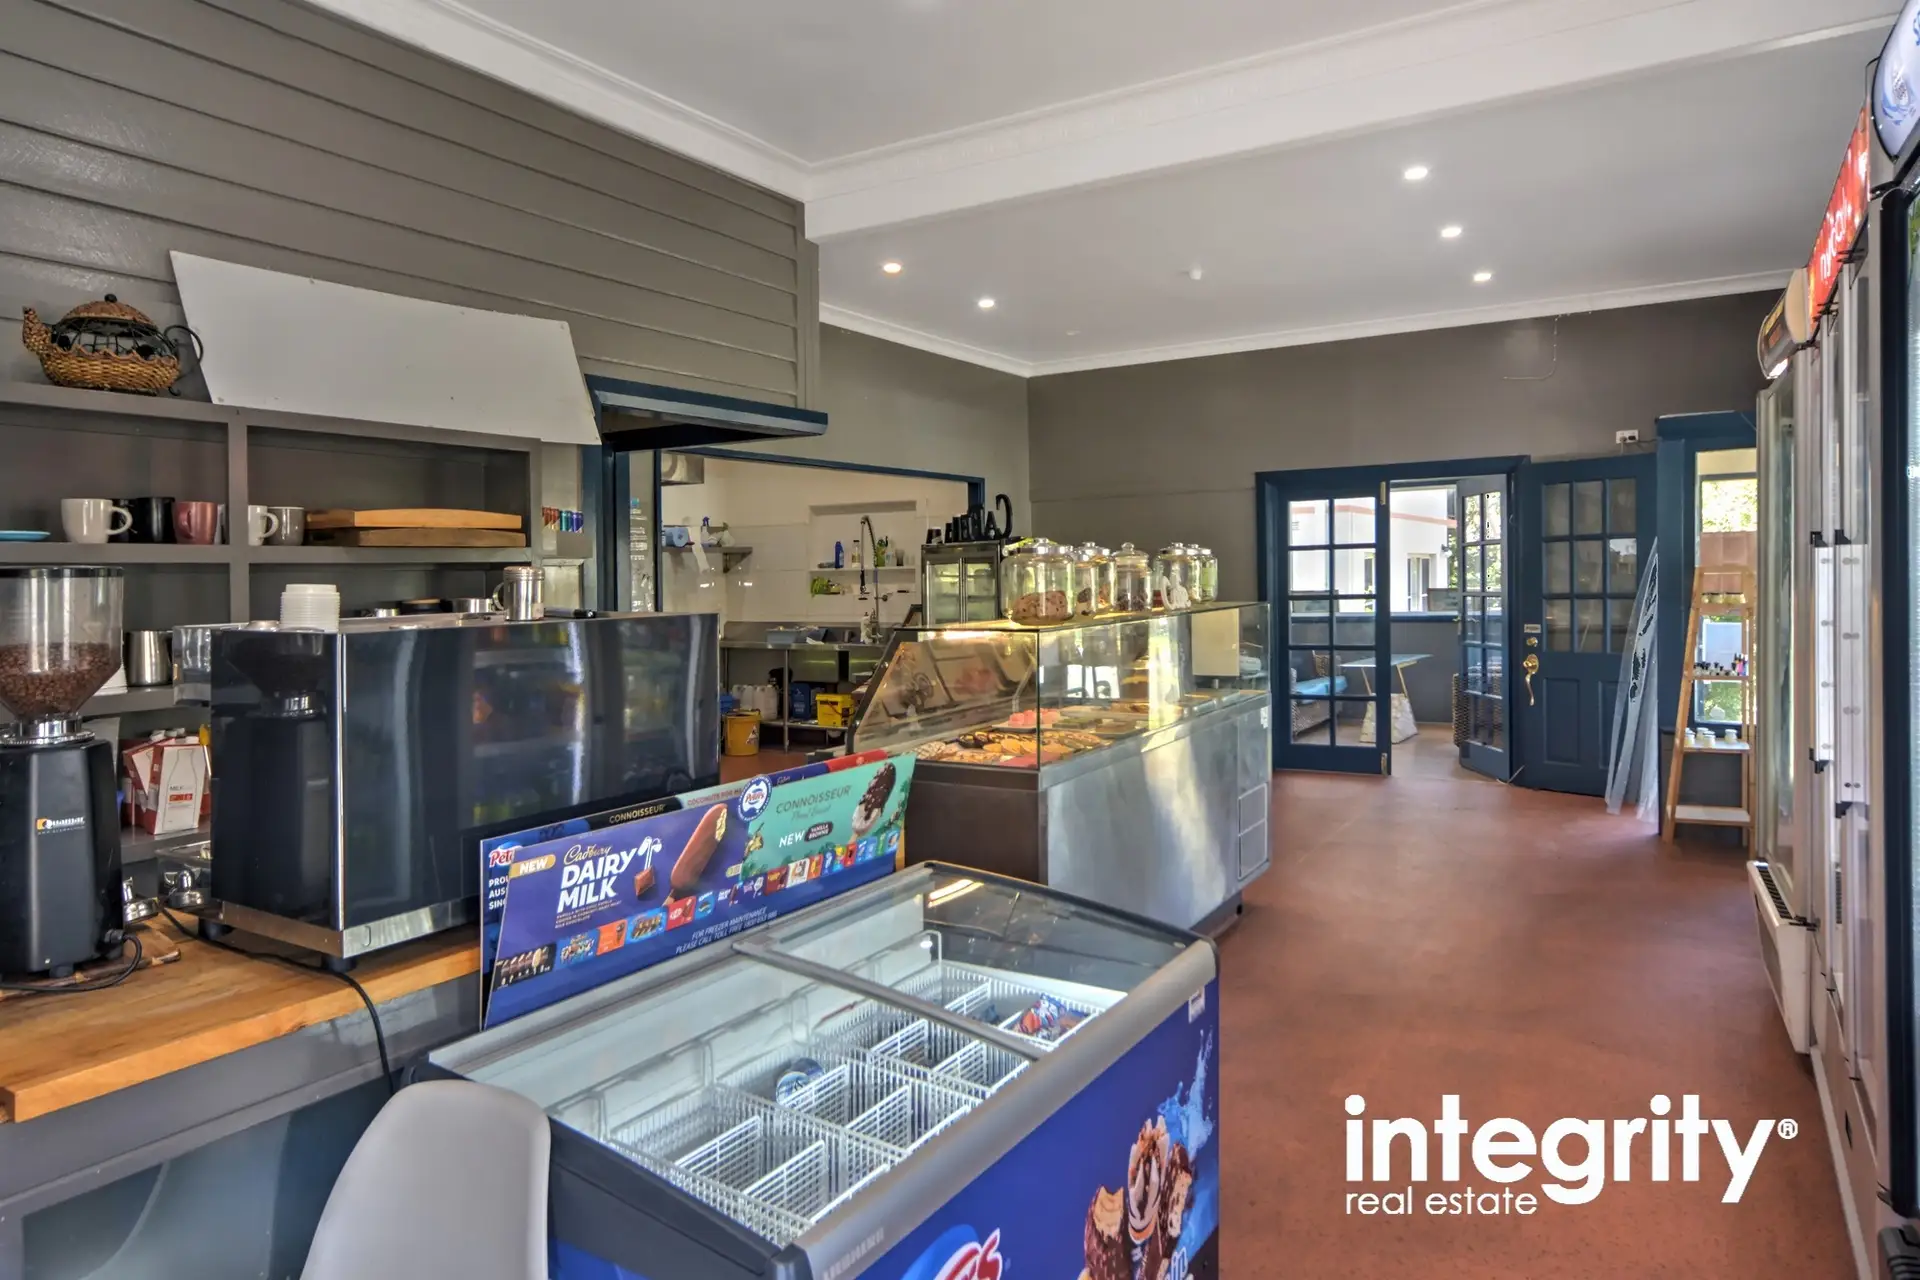 71 Plunkett Street, Nowra For Sale by Integrity Real Estate - image 2